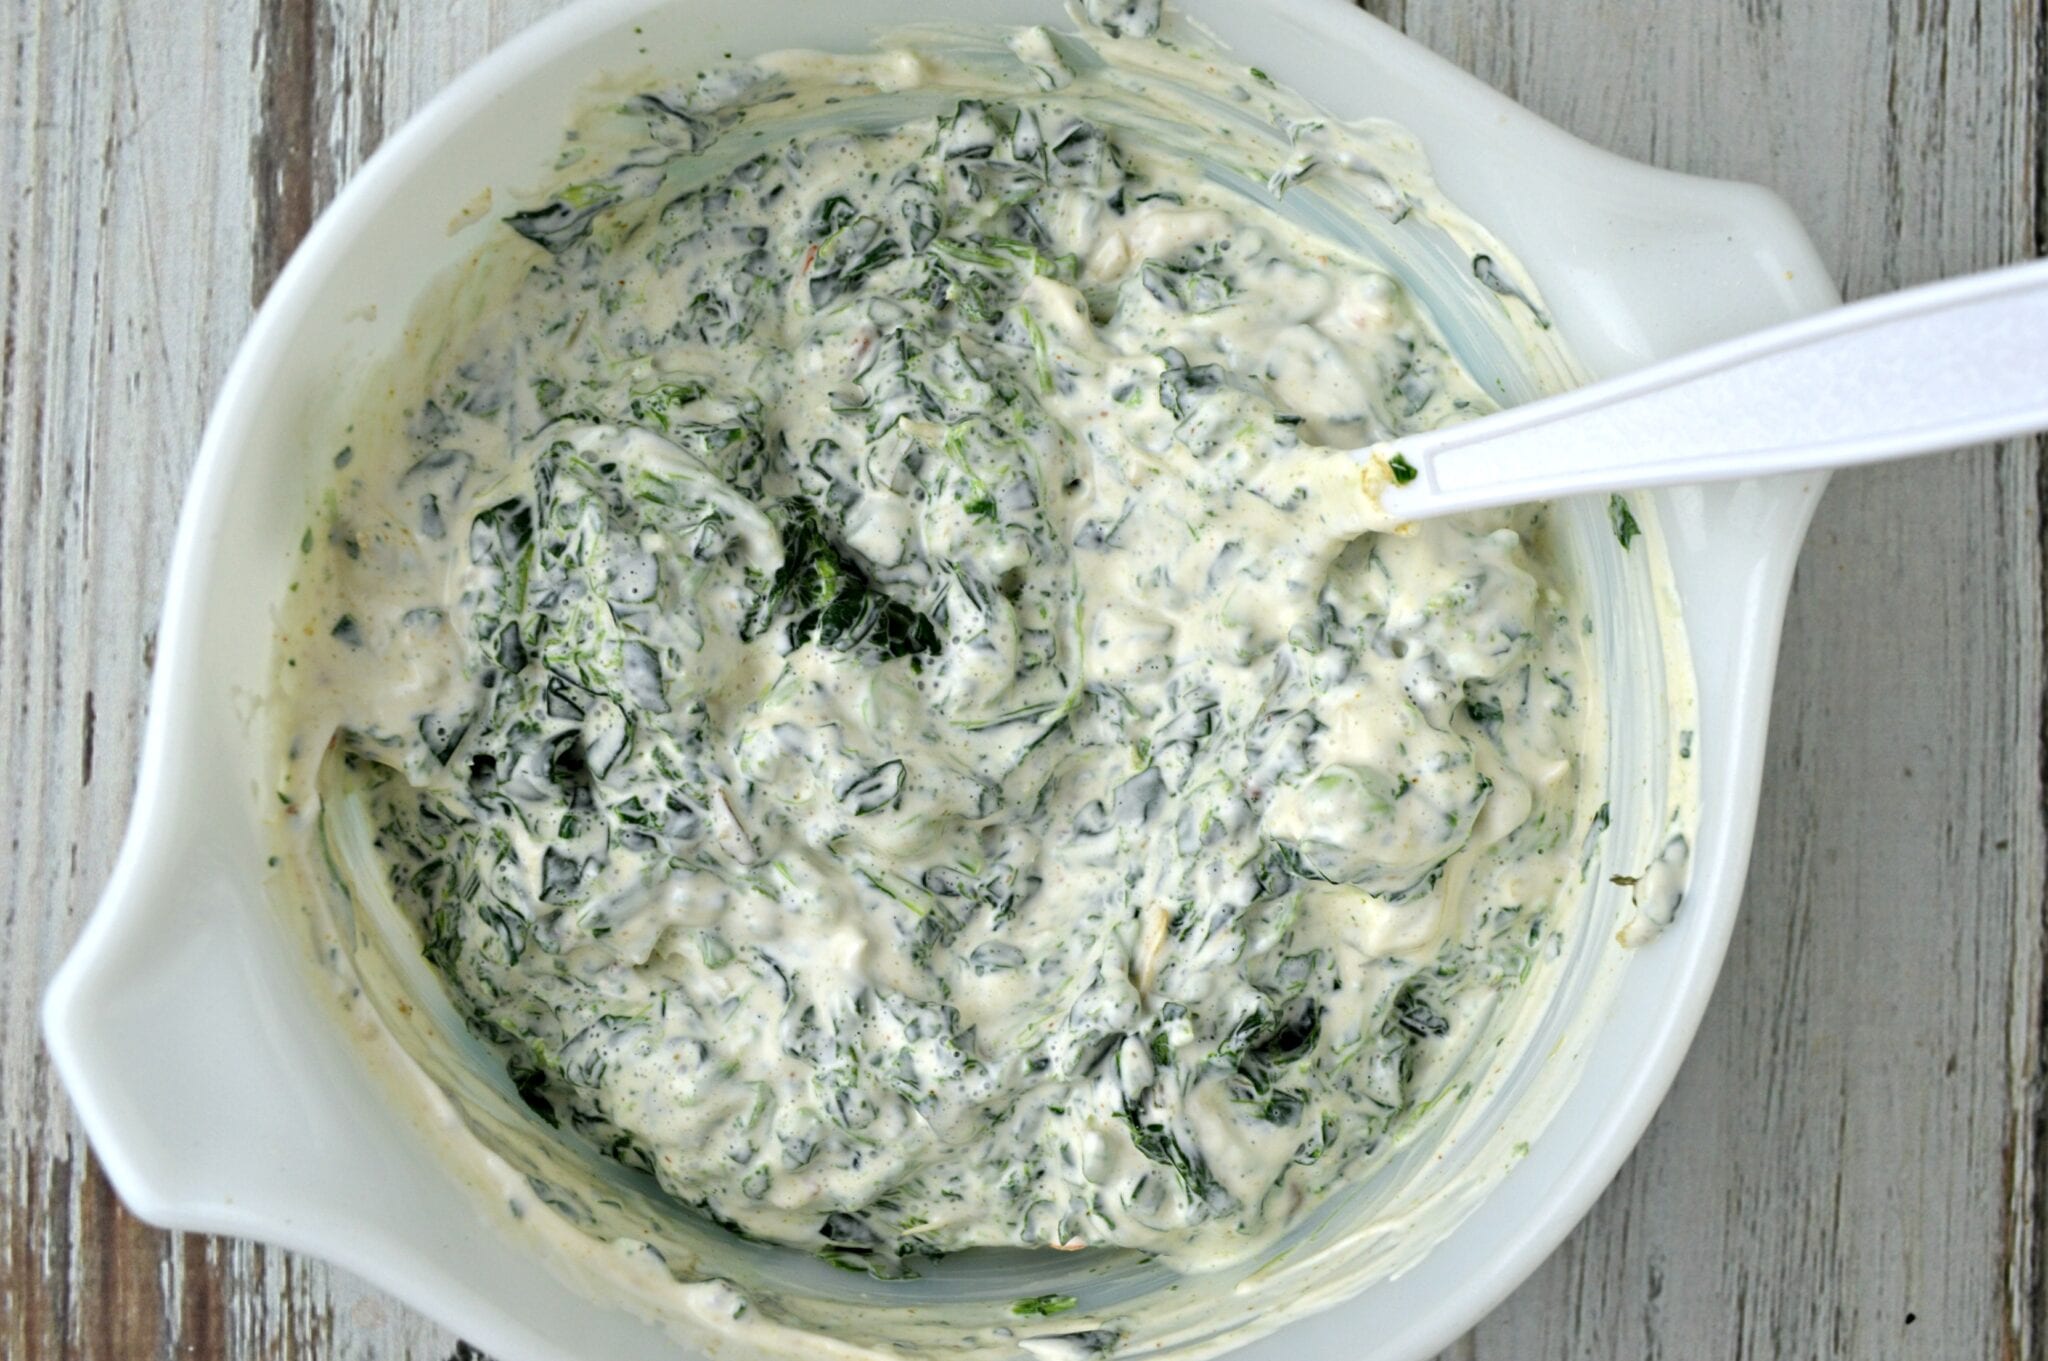 Easy To Make Cold Spinach Dip Recipe! - Thrifty NW Mom